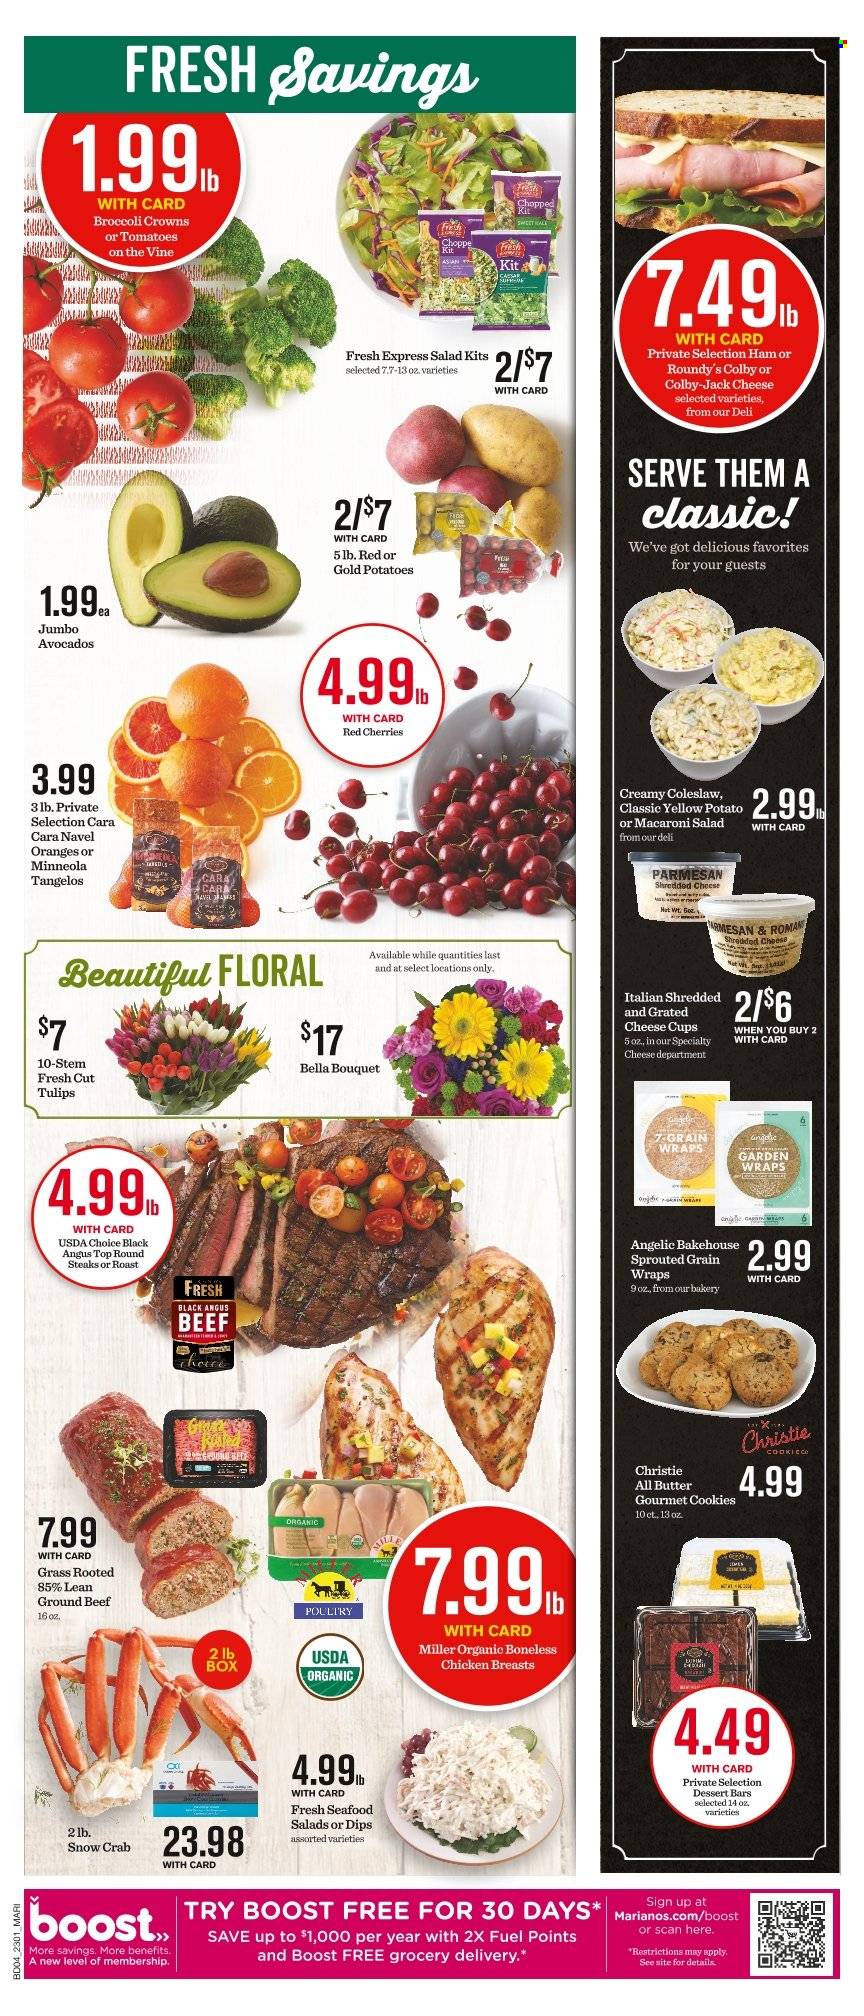 thumbnail - Mariano’s Flyer - 02/01/2023 - 02/07/2023 - Sales products - wraps, Bella, tomatoes, potatoes, salad, avocado, tangelos, cherries, oranges, seafood, crab, coleslaw, ham, macaroni salad, Colby cheese, shredded cheese, cheese cup, parmesan, grated cheese, cookies, Boost, Miller, chicken breasts, beef meat, ground beef, steak, cup, tulip, bouquet, navel oranges. Page 3.